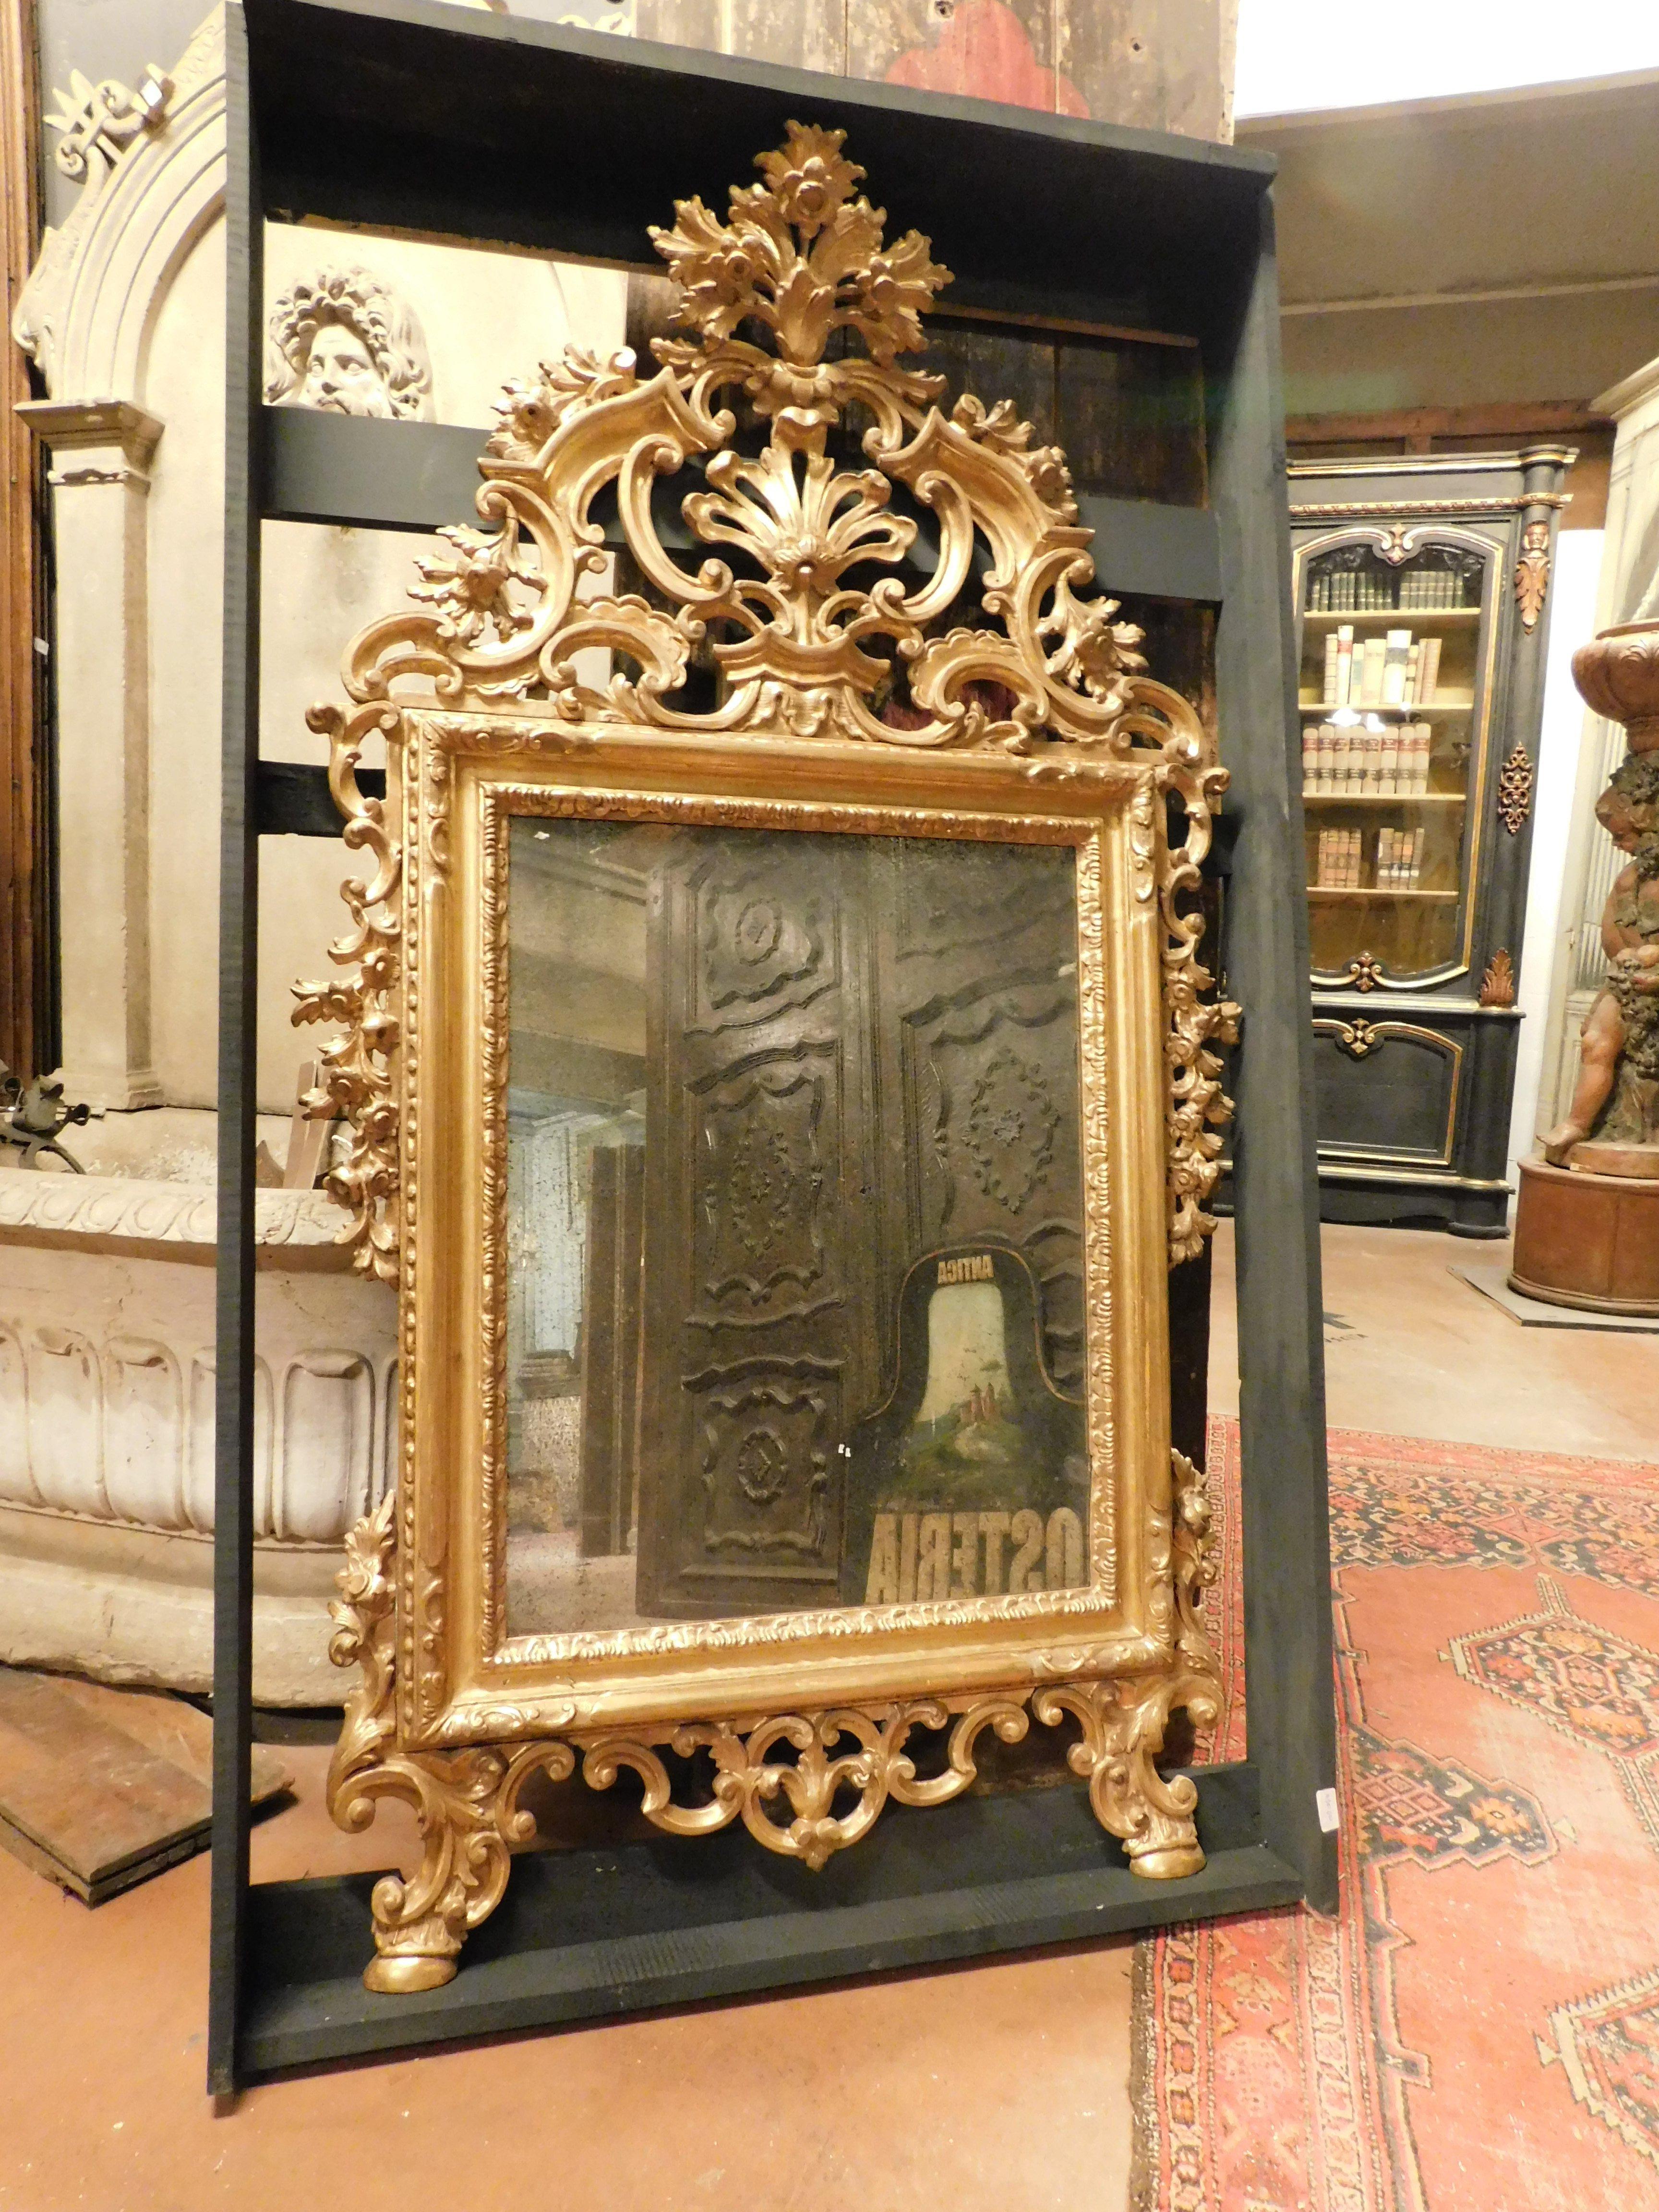 Ancient mirror in gilded wood, mirror above fireplace or wall, enriched by frieze perforated with volutes and carved floral and leafy elements, hand-built in the 1800s, from Naples (Italy), maximum dimensions cm W 90 x H 163.
Very rich and very